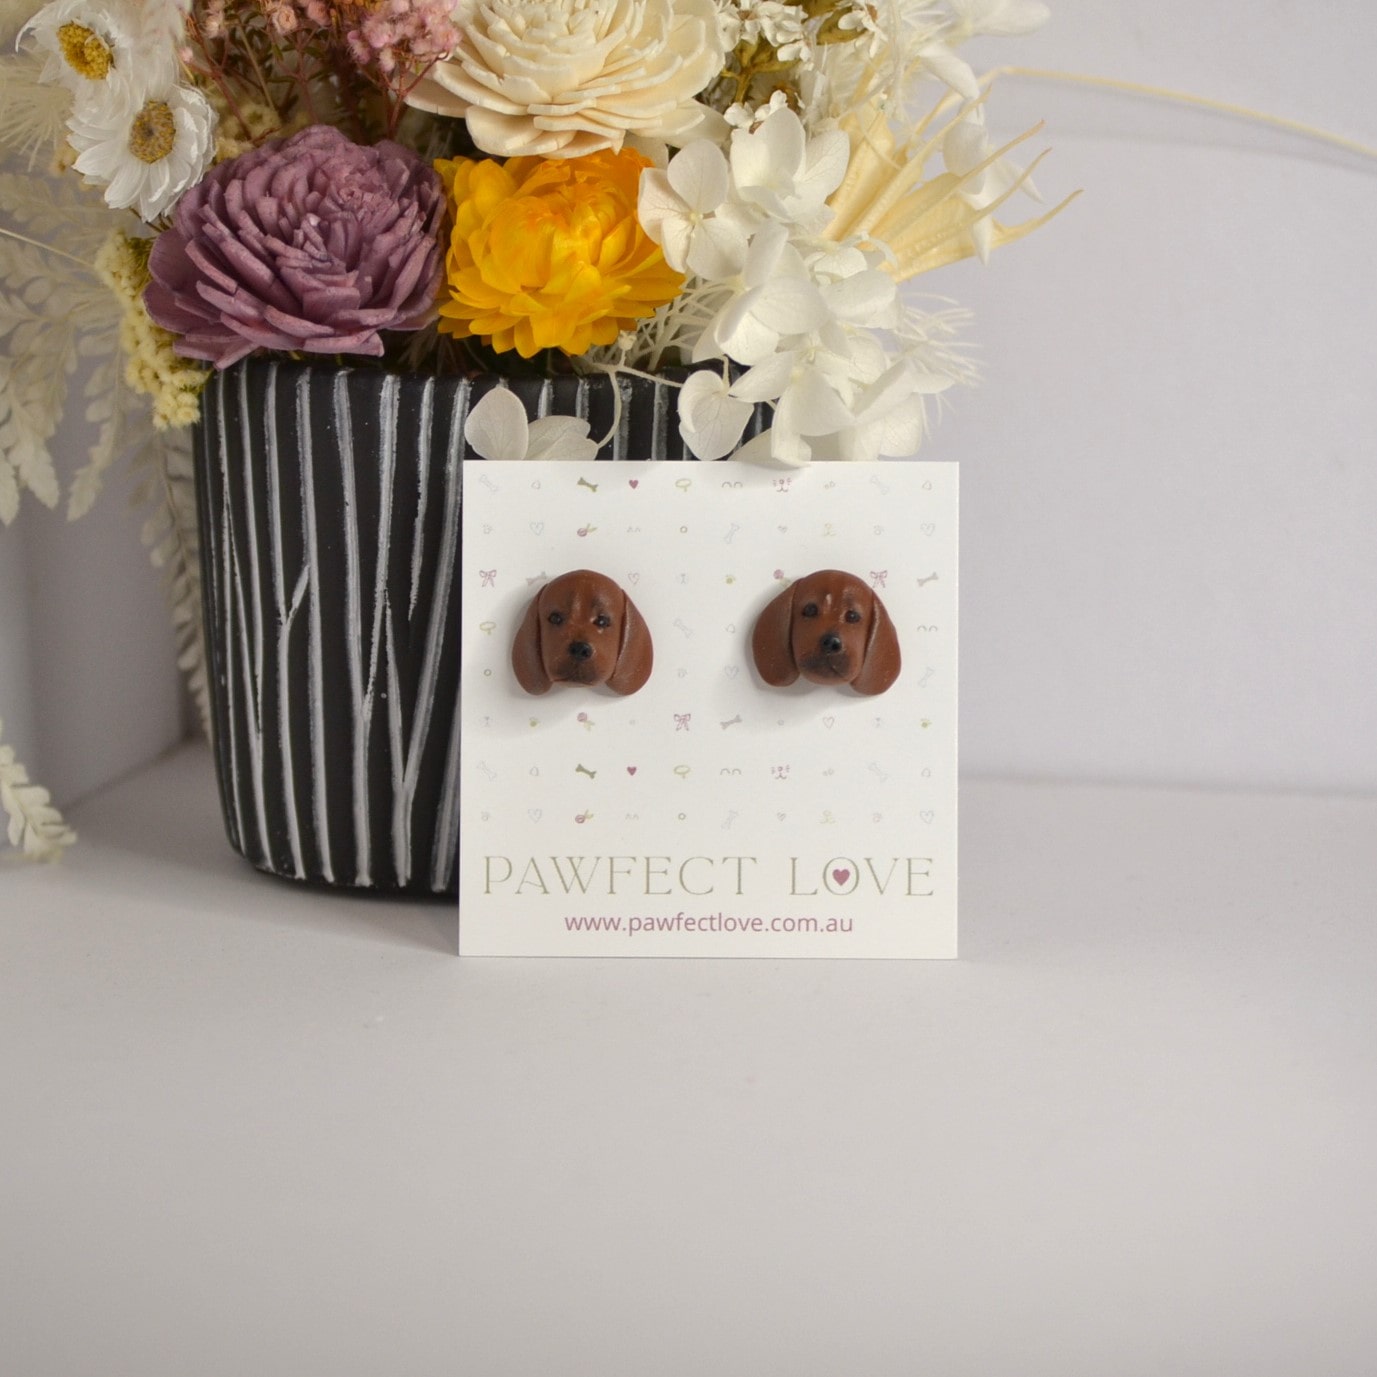 Handmade dachshund stud earrings by Pawfect Love, positioned in front of dried flower arrangement